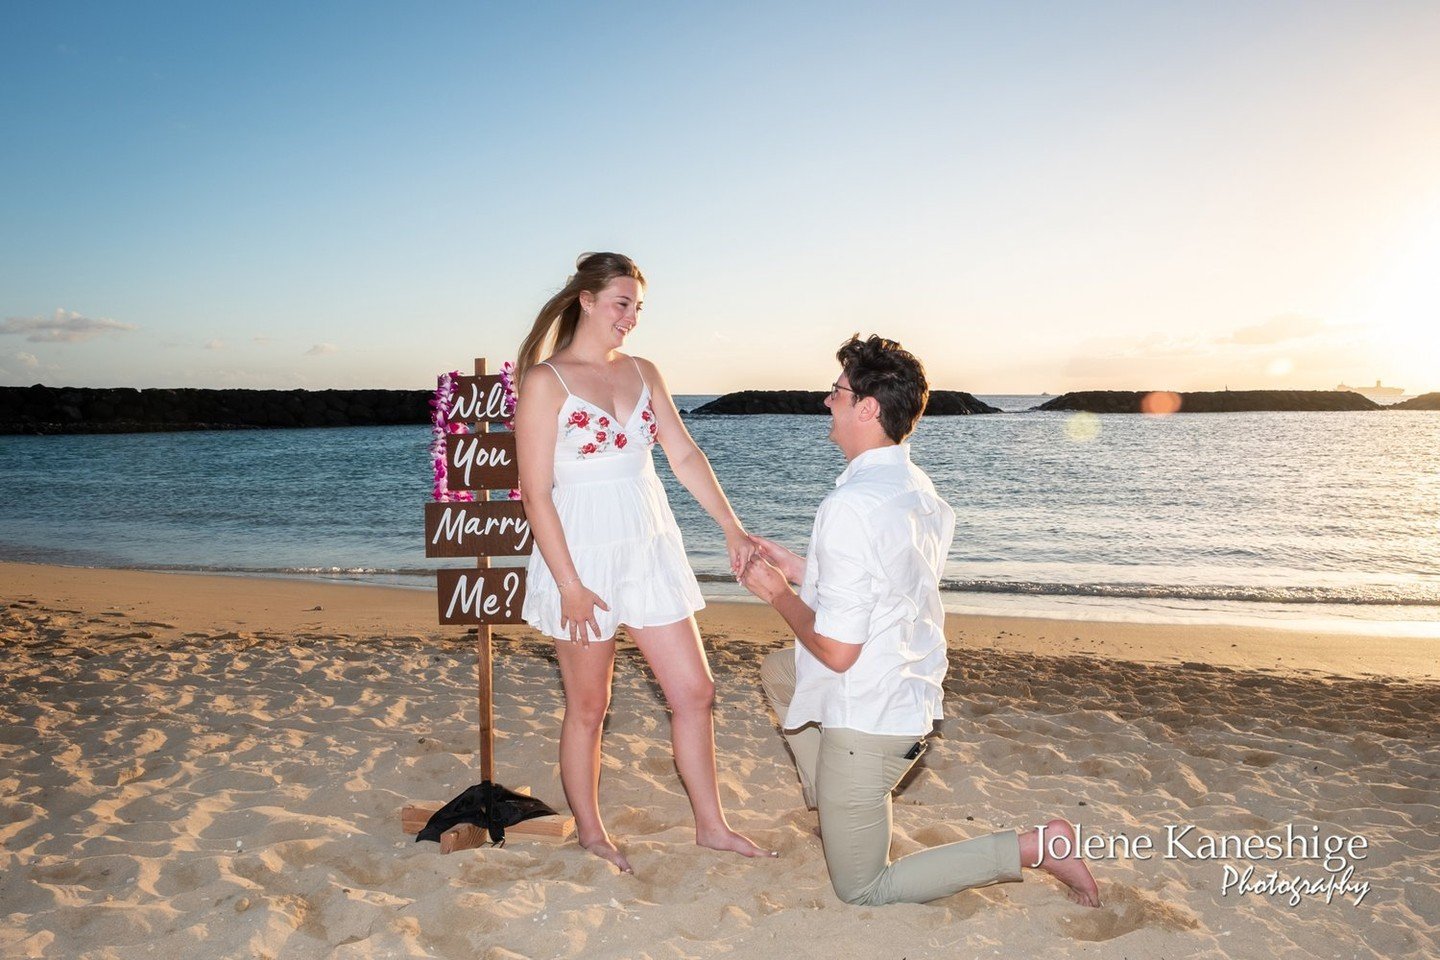 Unlocking Romance: A quick guide to level up your proposal
Read More: https://www.jolenekaneshige.com/blog/unlocking-romance-a-quick-guide-to-level-up-your-proposal 

#DestinationWedding #HawaiiWedding #HawaiiPhotography #BeachWedding #IslandWedding 